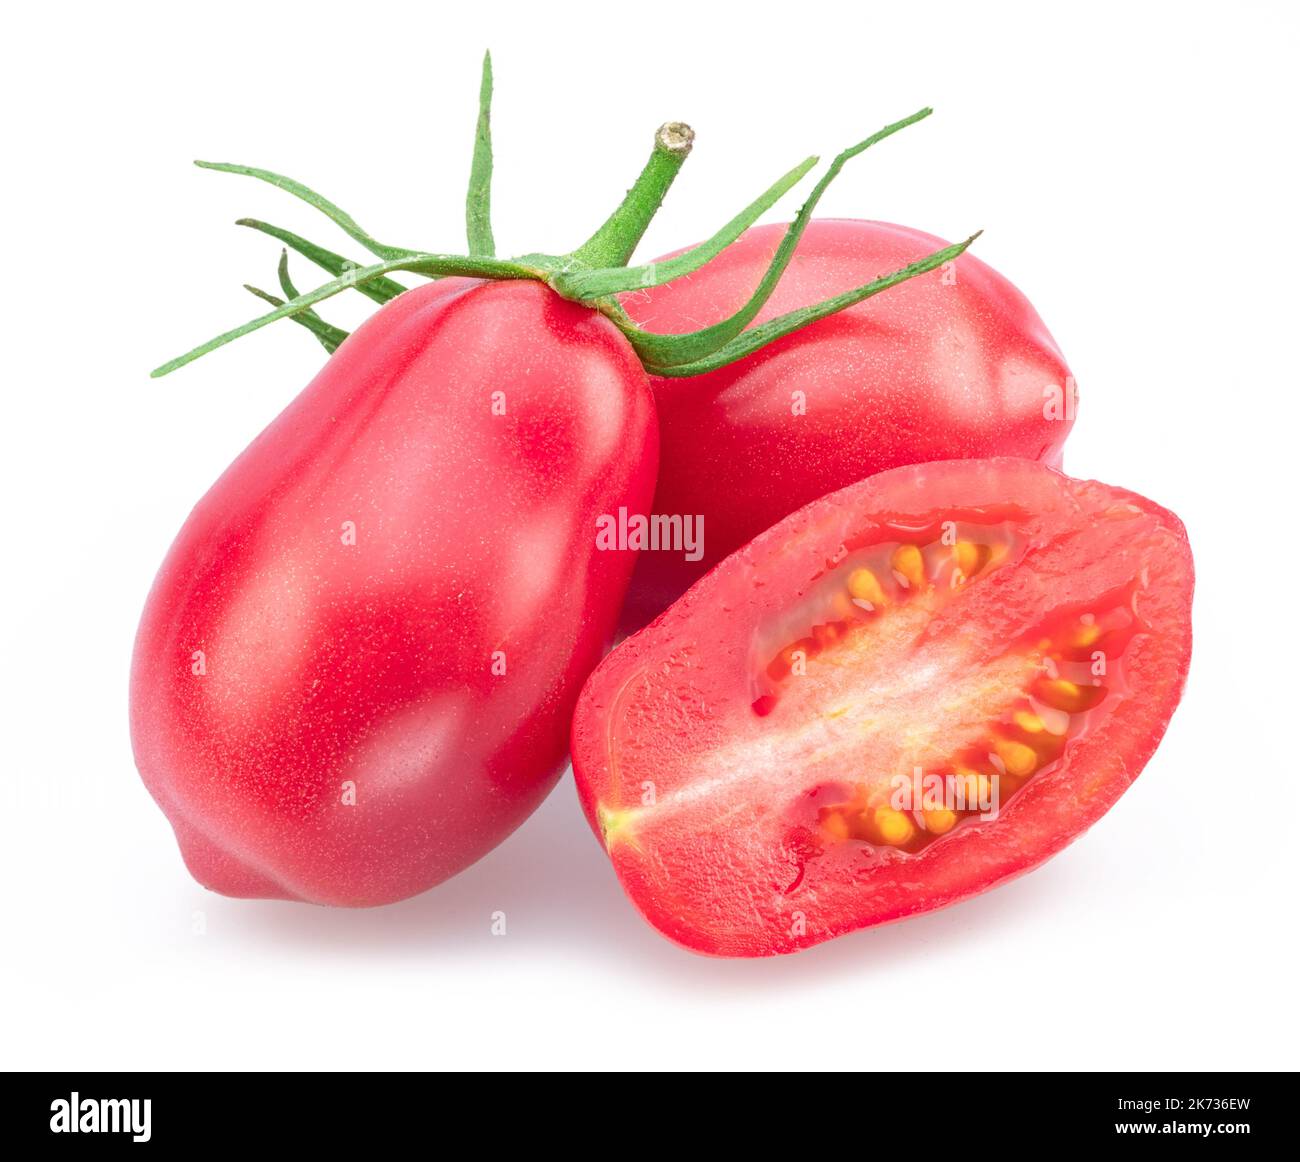 Pink tomatoes (plums) with tomato slice isolated on white background. Stock Photo